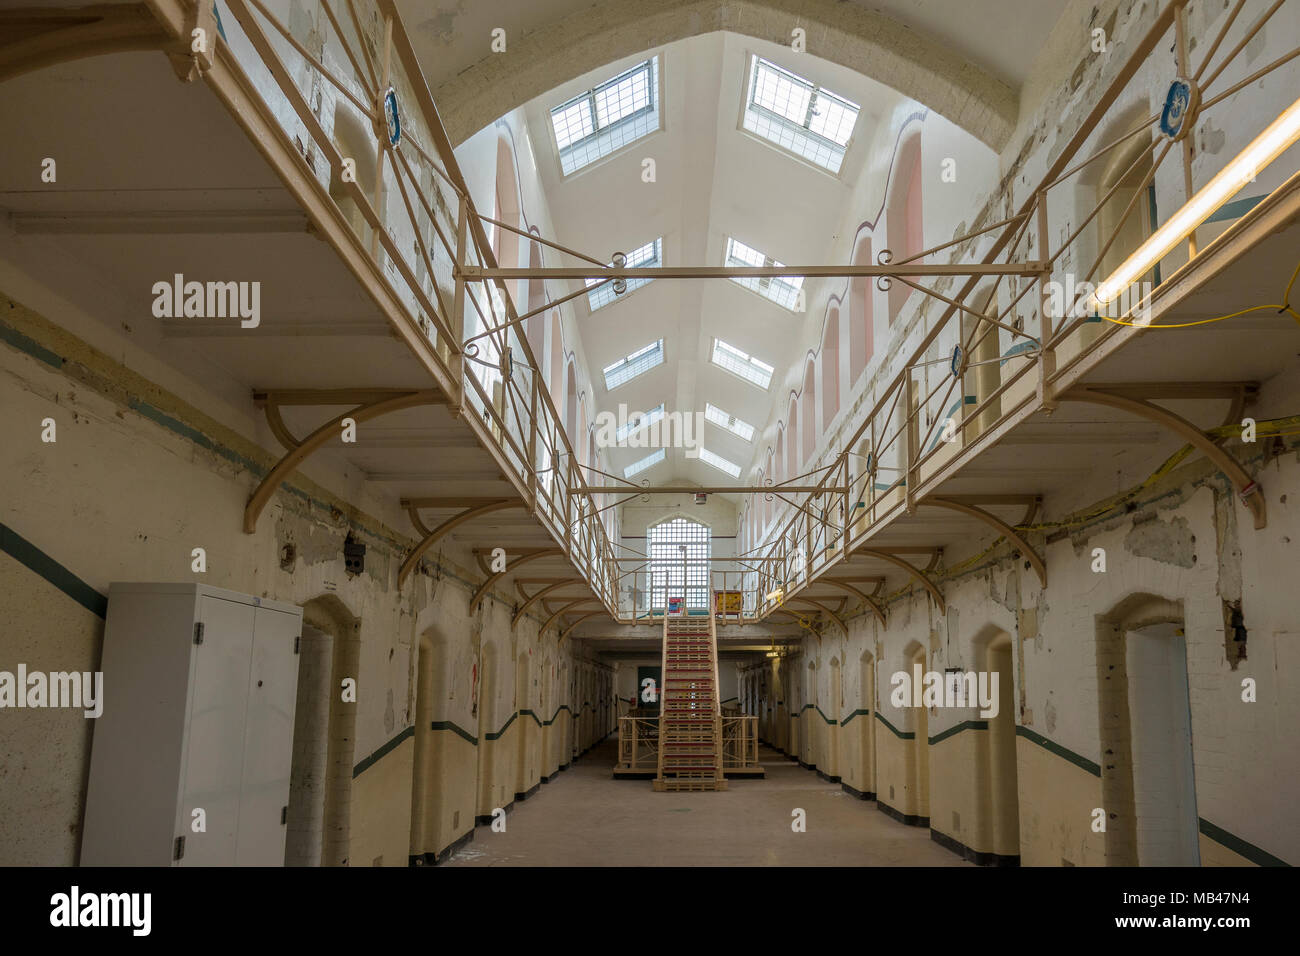 England, Hampshire, Portsmouth, Pompey Prison, cell block  interior view Stock Photo